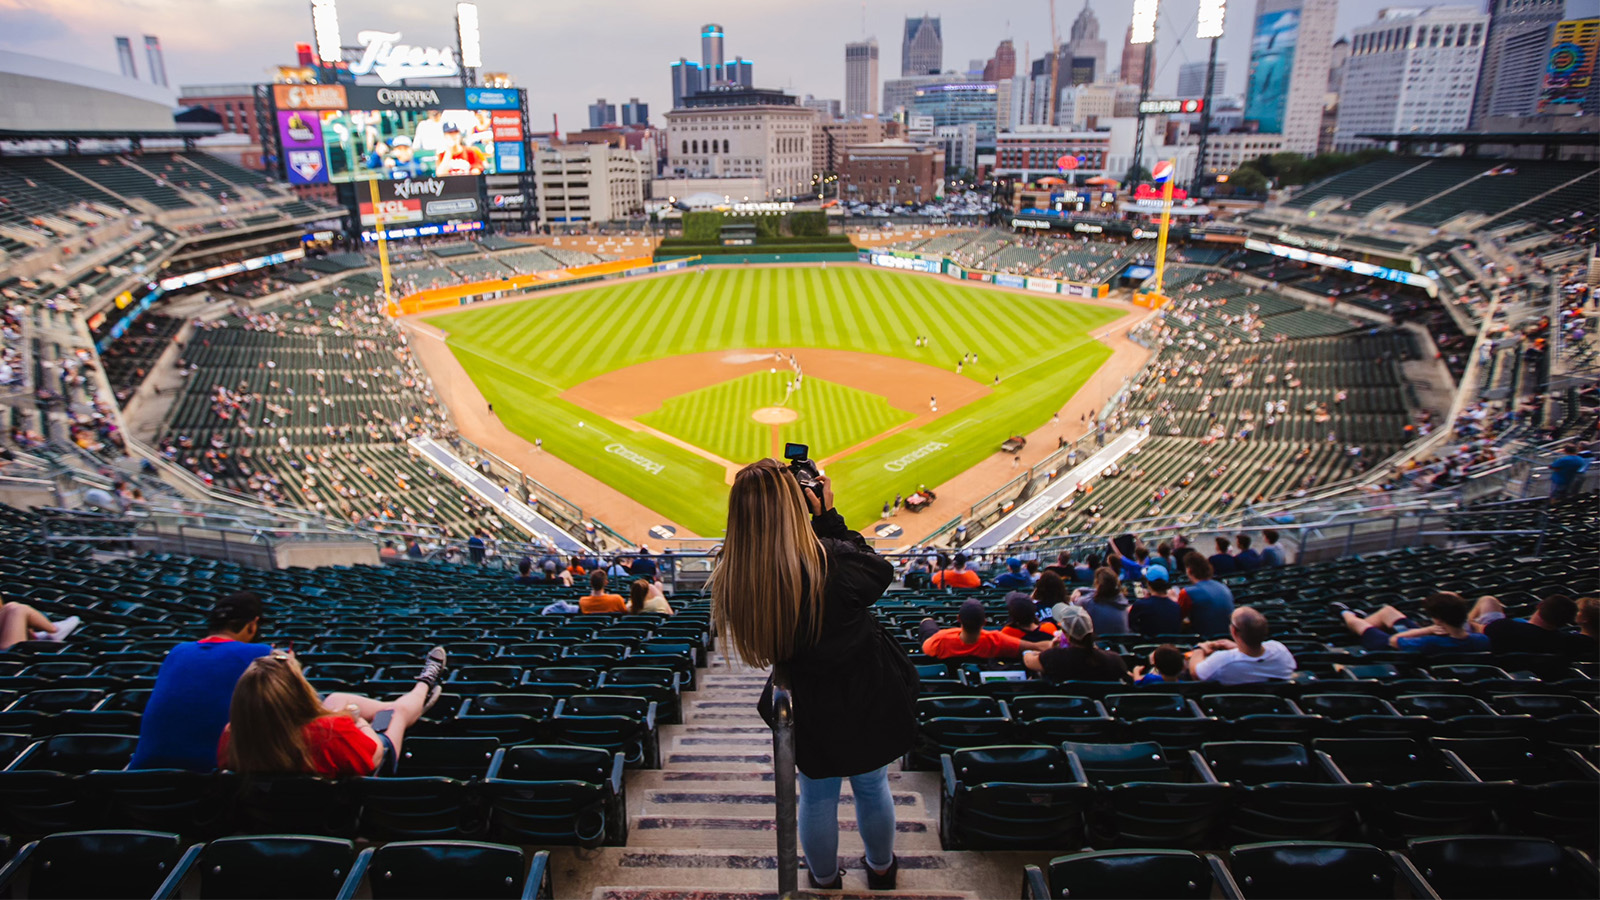 This is a panoramic picture from the upper deck level inside Comerica Park in Detroit, facing the ball field with a woman in the foreground holding a camera in front of her face.